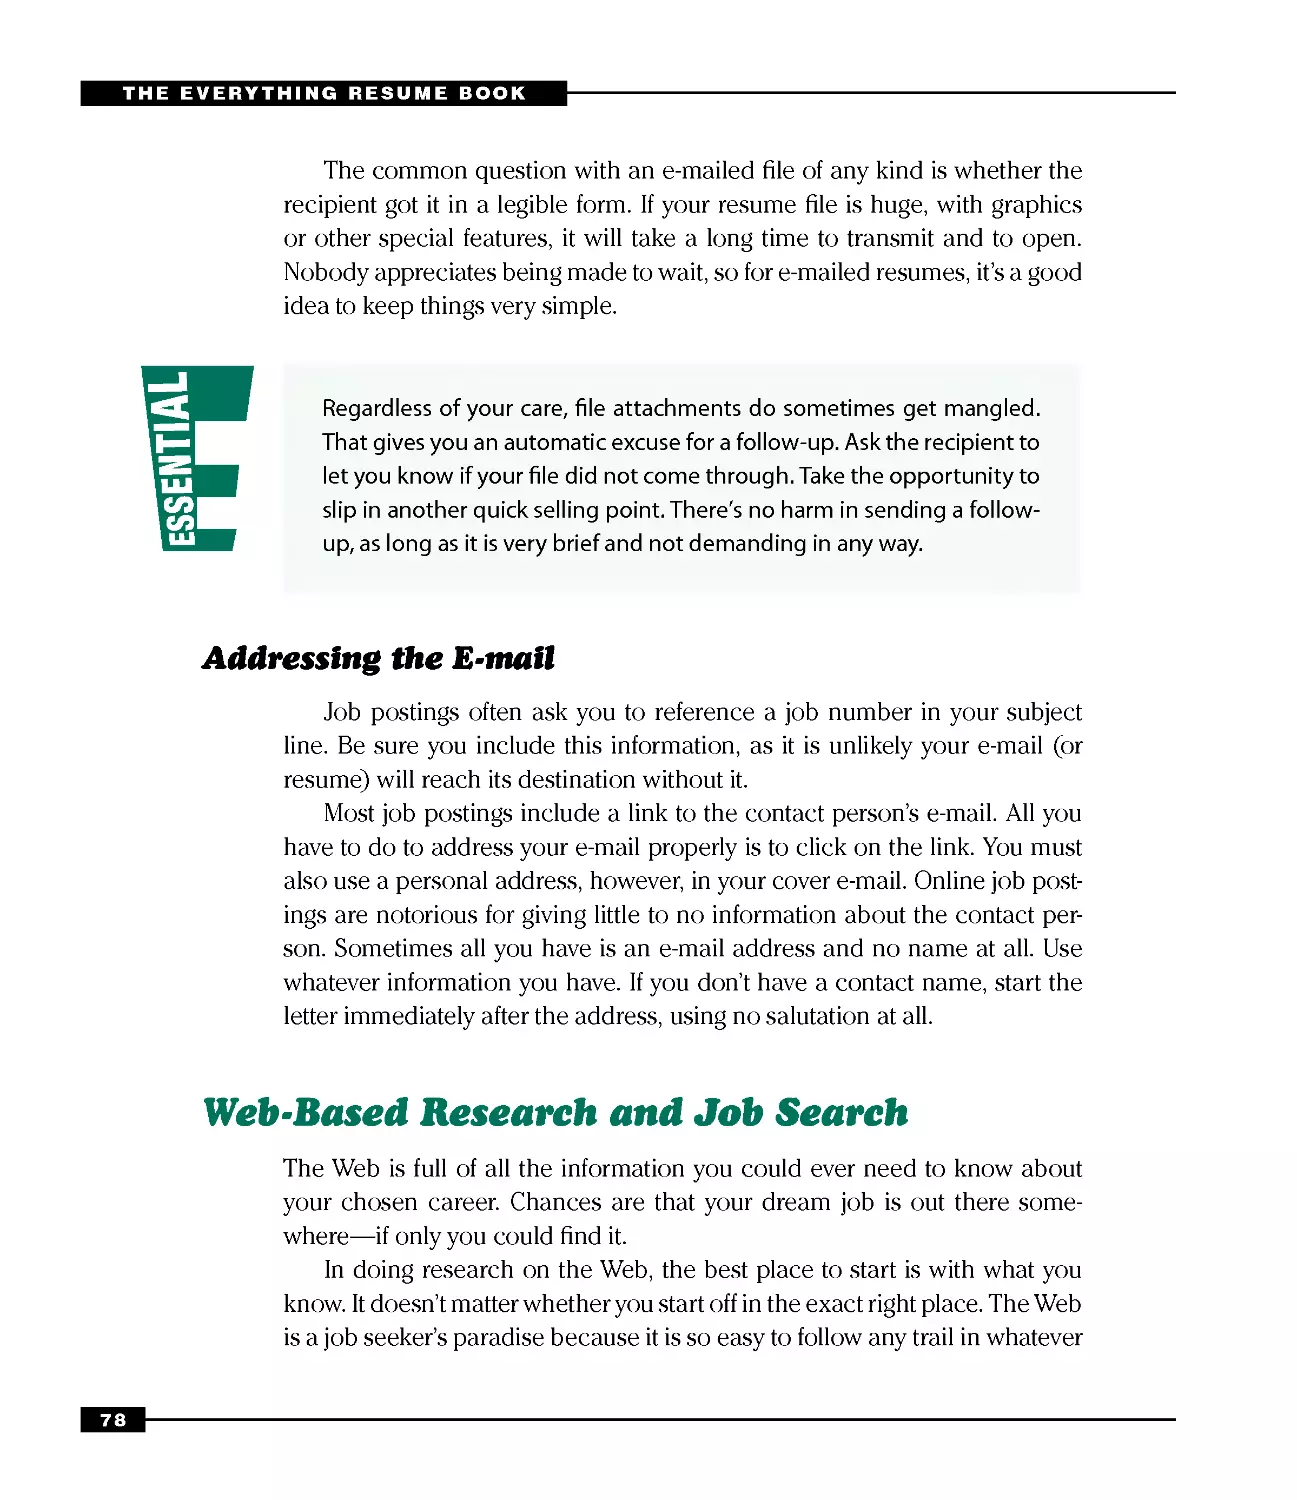 Web-Based Research and Job Search